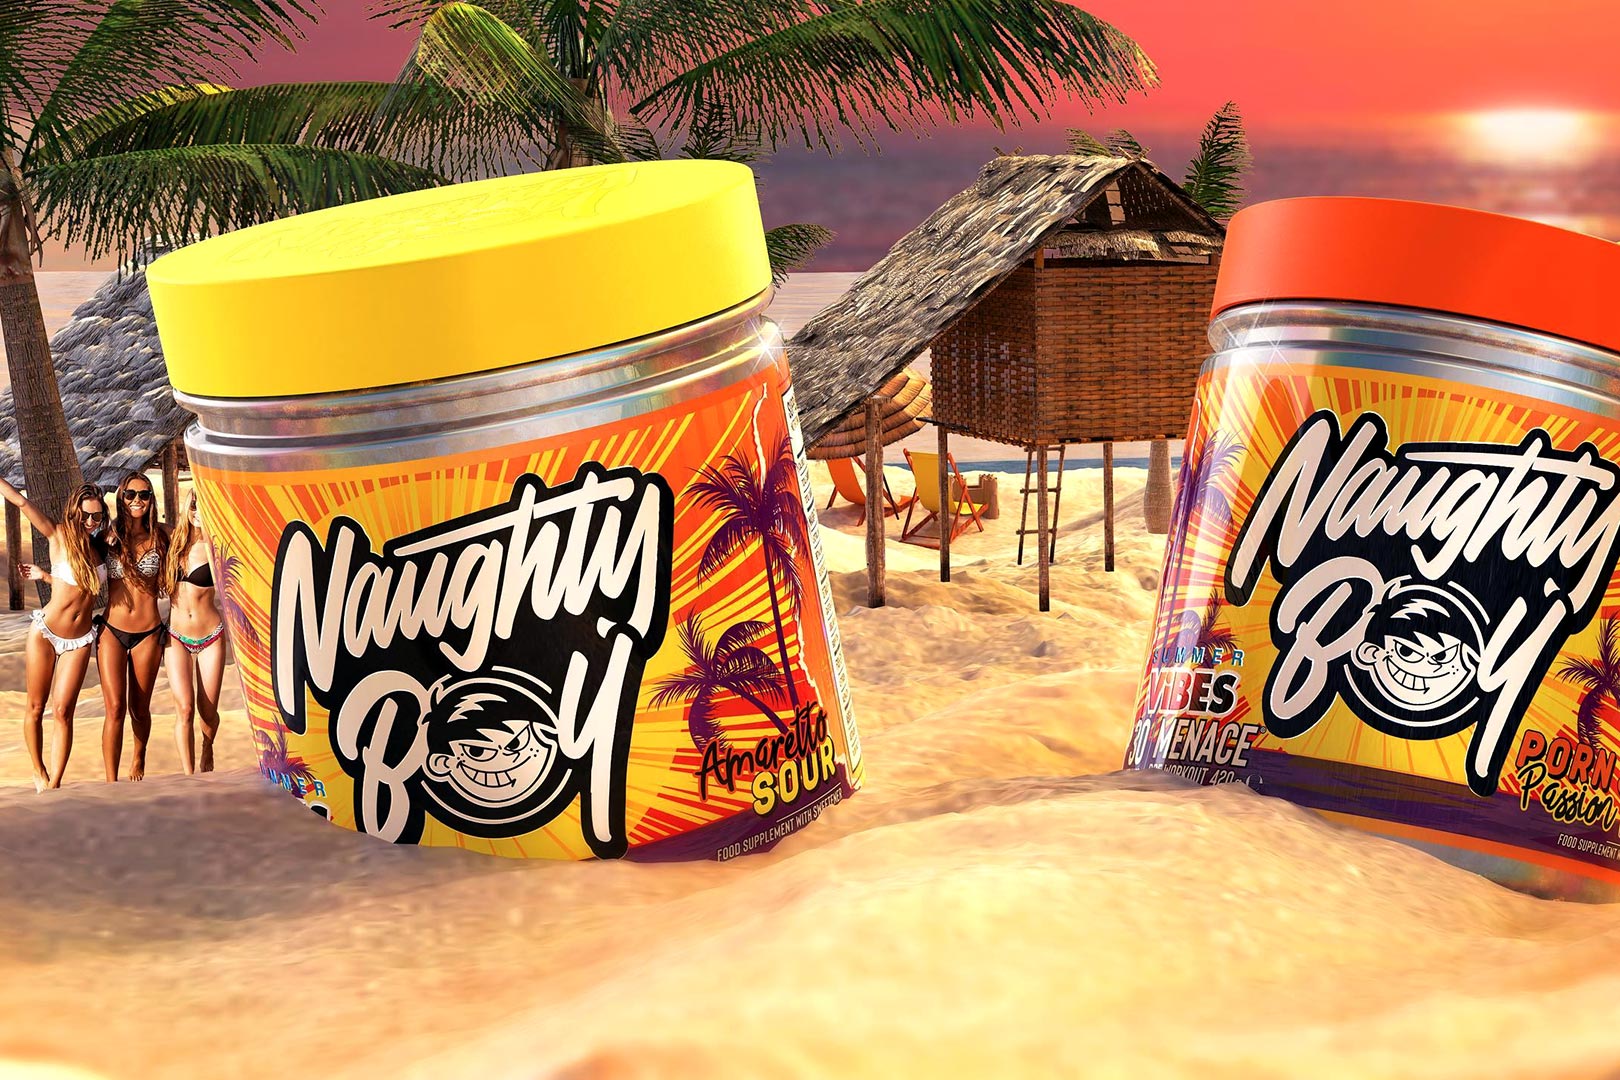 Naughtyboy Com - Naughty Boy shows off its creativity once again in its Summer Vibes Series